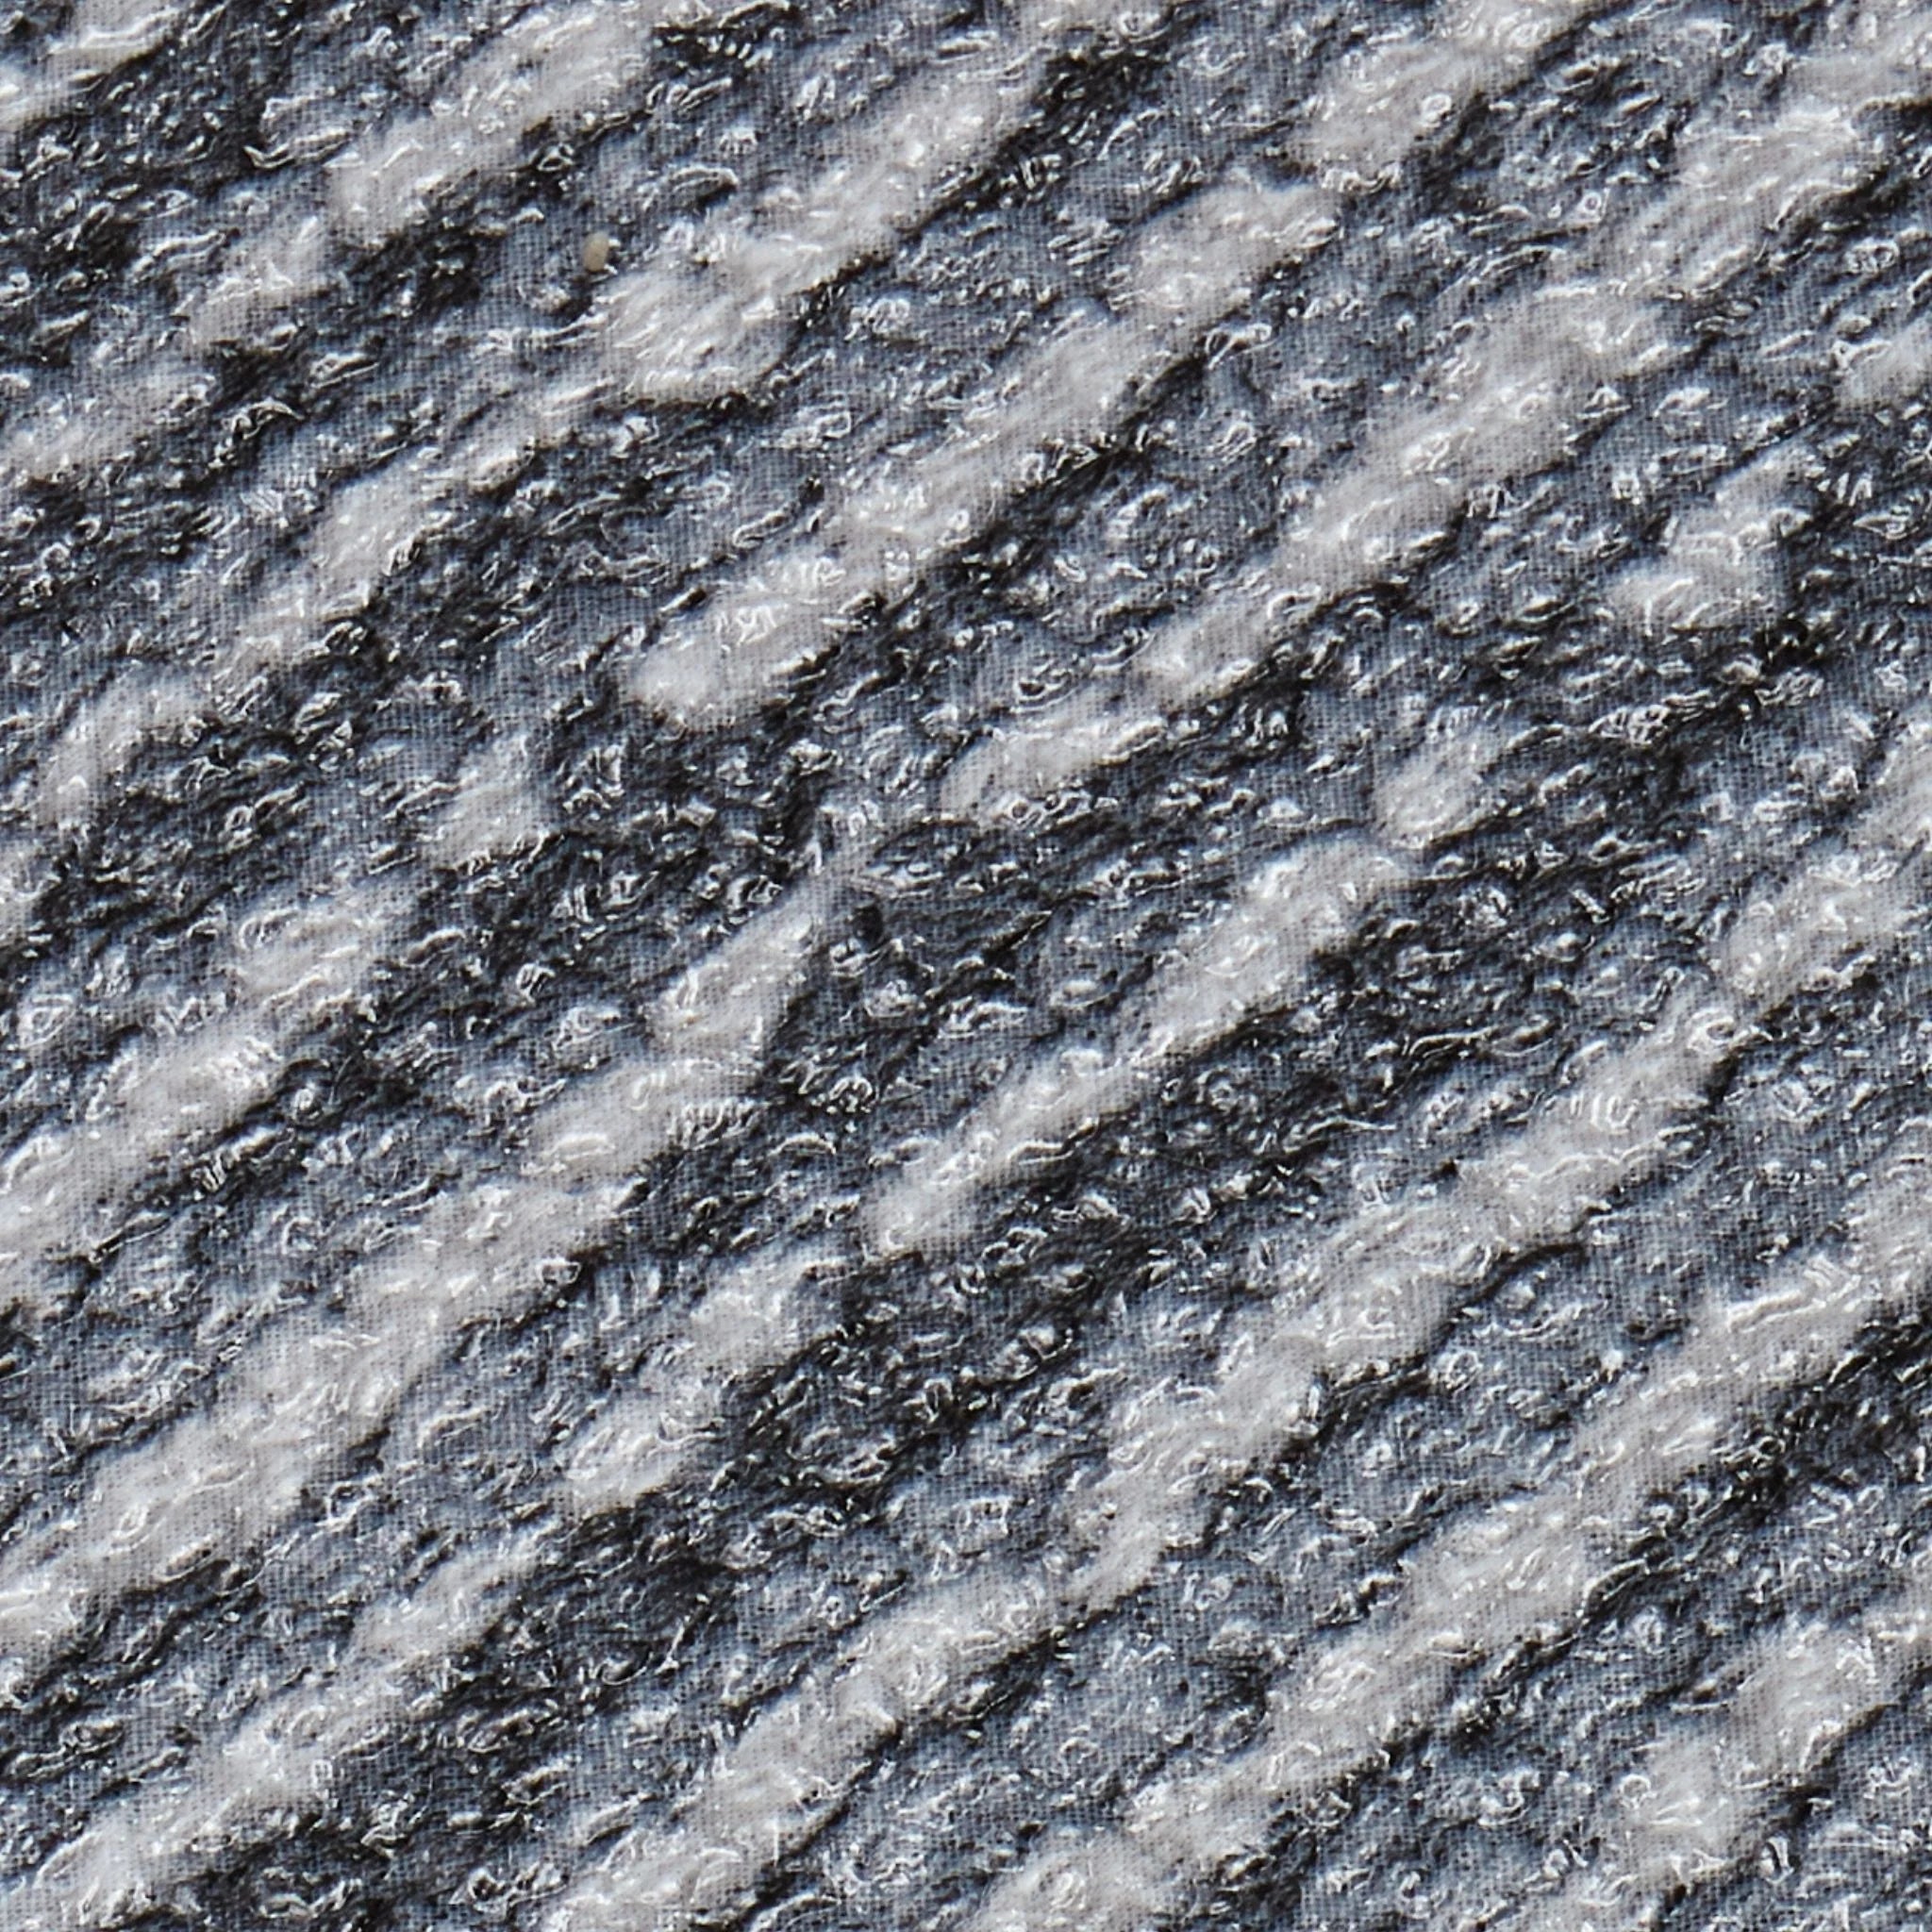 close-up texture of a grey woven carpet, showing detailed fabric weave